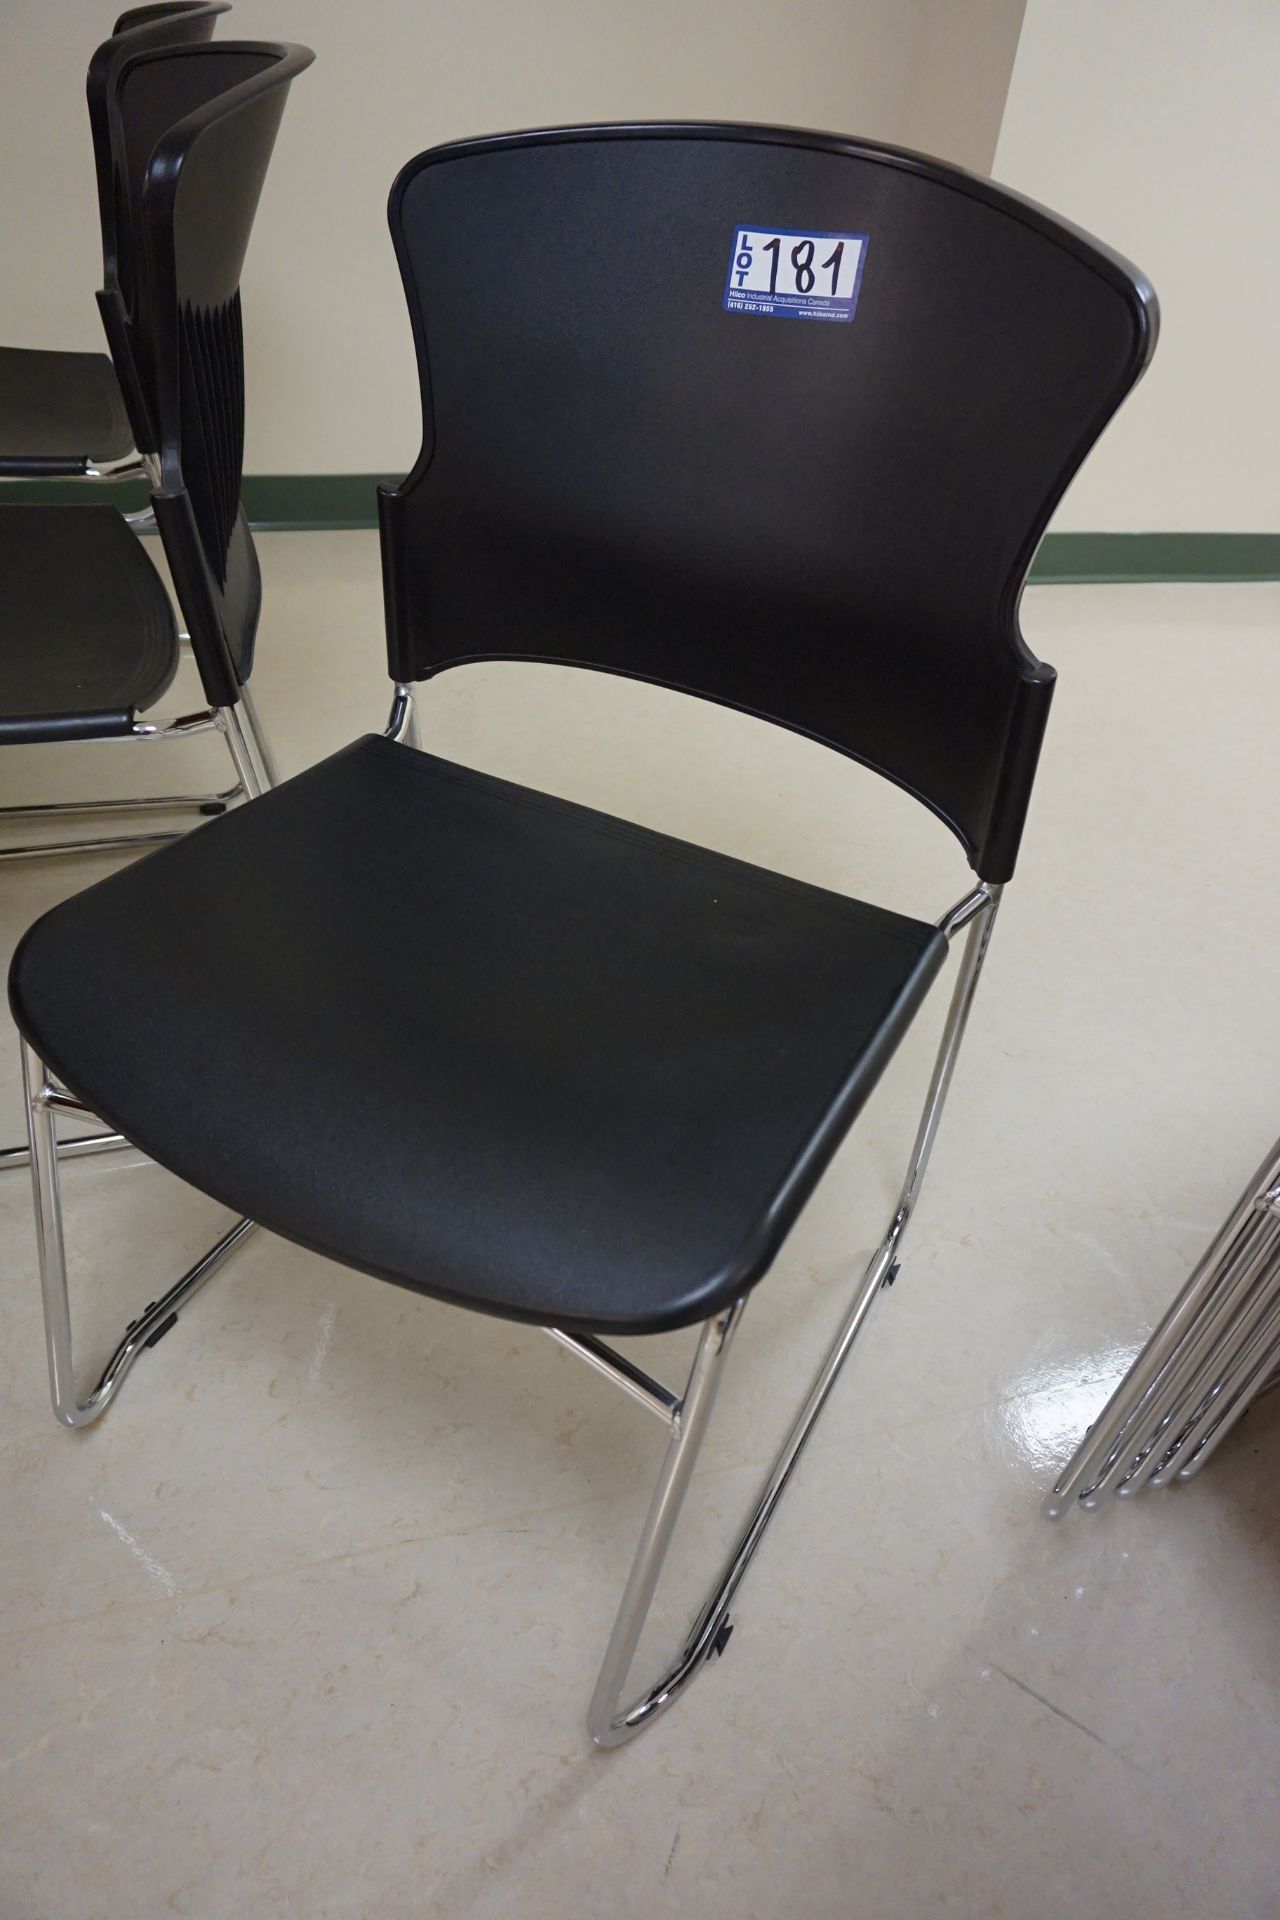 Model 3050 Black/Chrome Stacking Chairs - Image 2 of 2